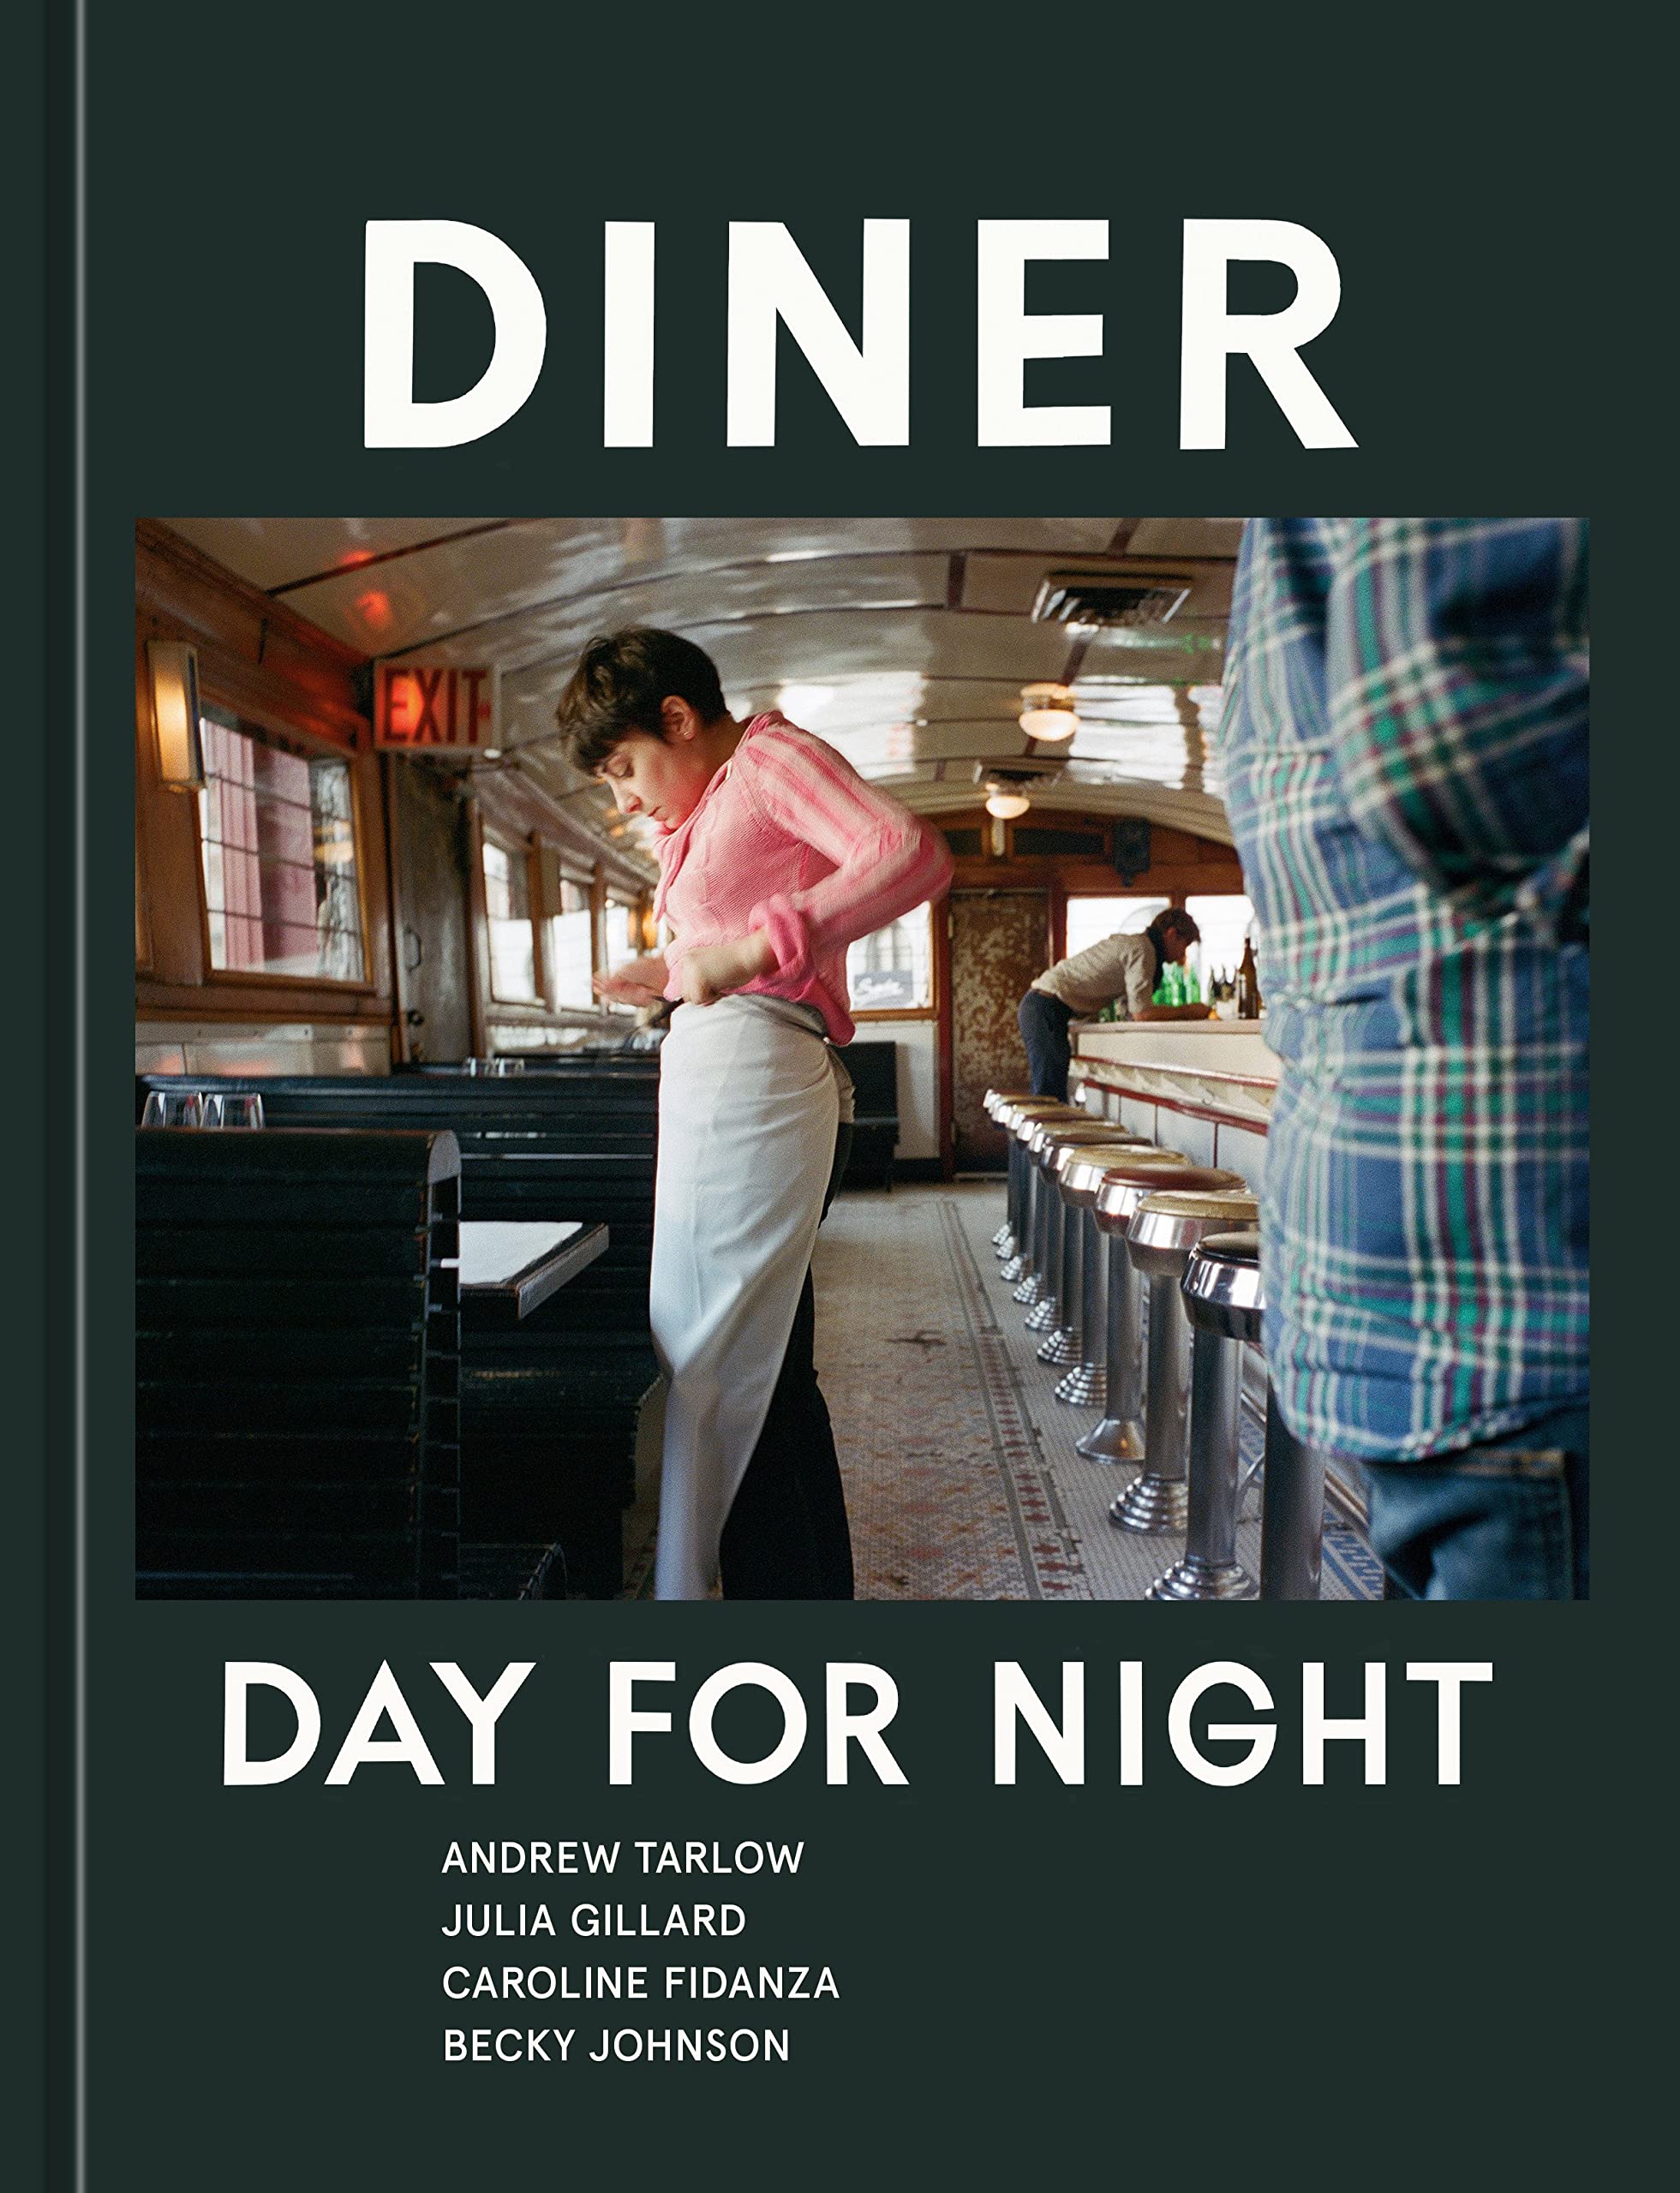 Diner: Day for Night (Andrew Tarlow) *Signed*